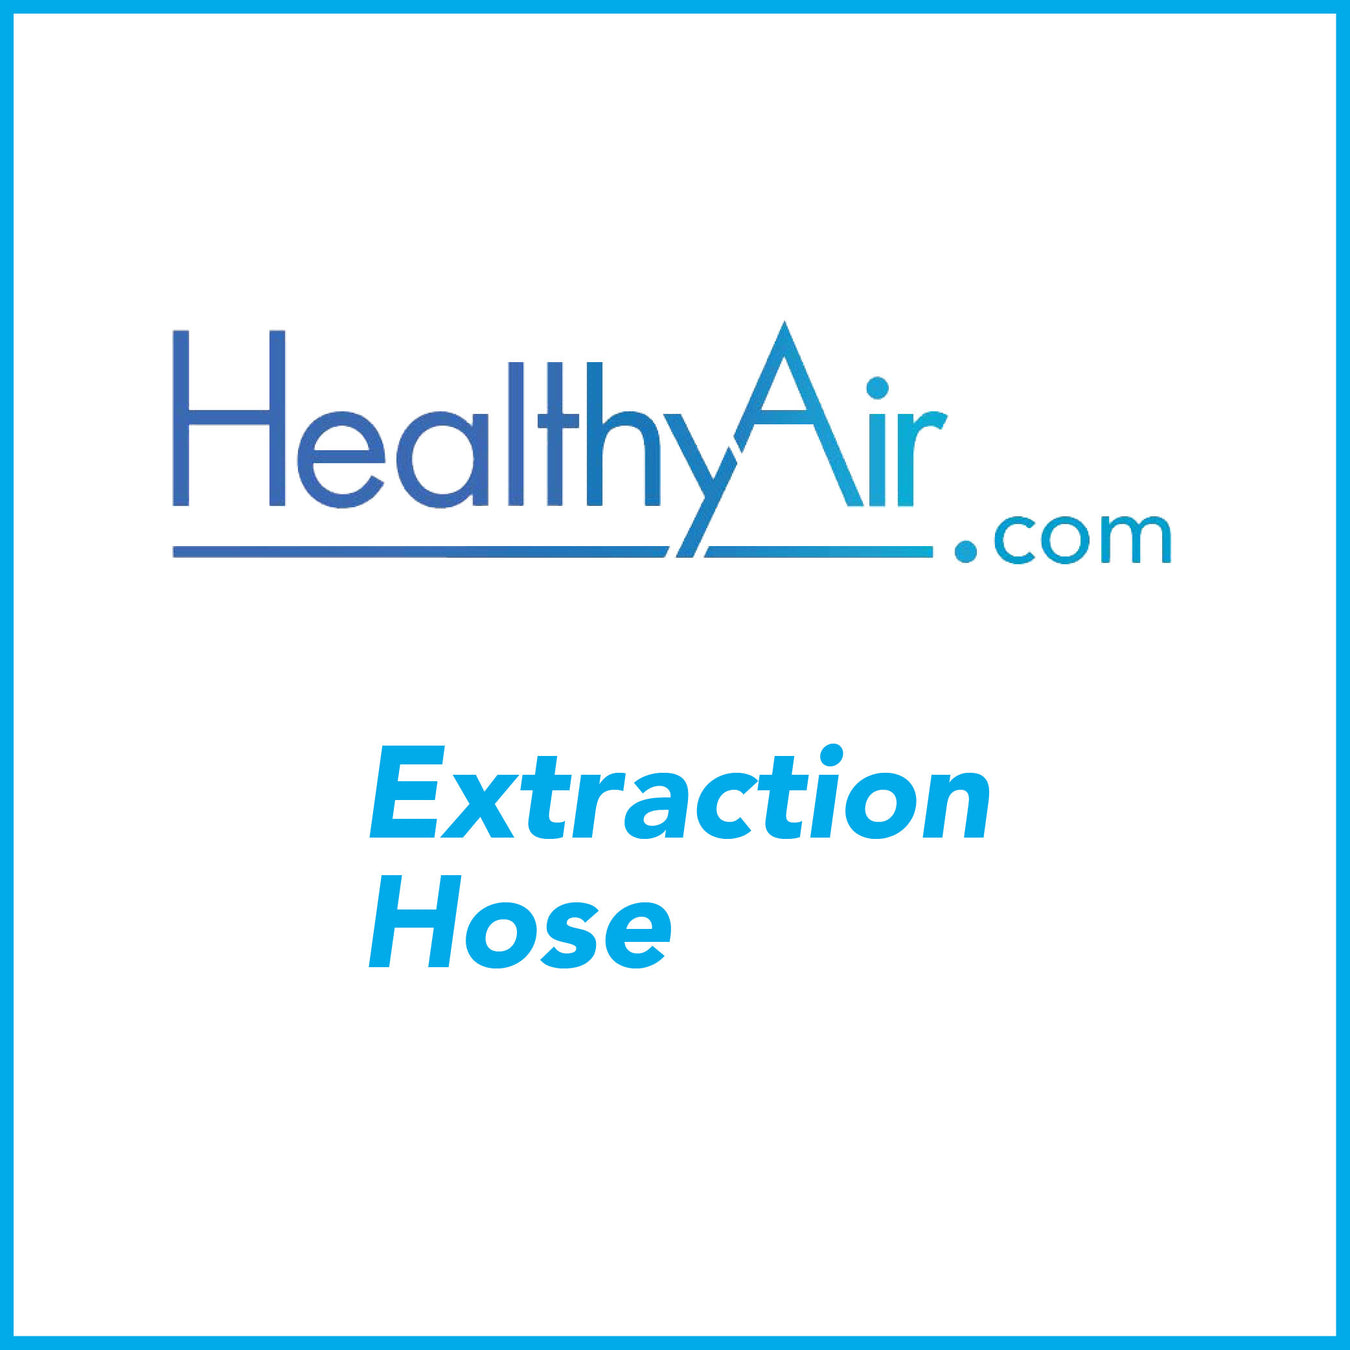 Replacement Hose - Healthy Air Inc.